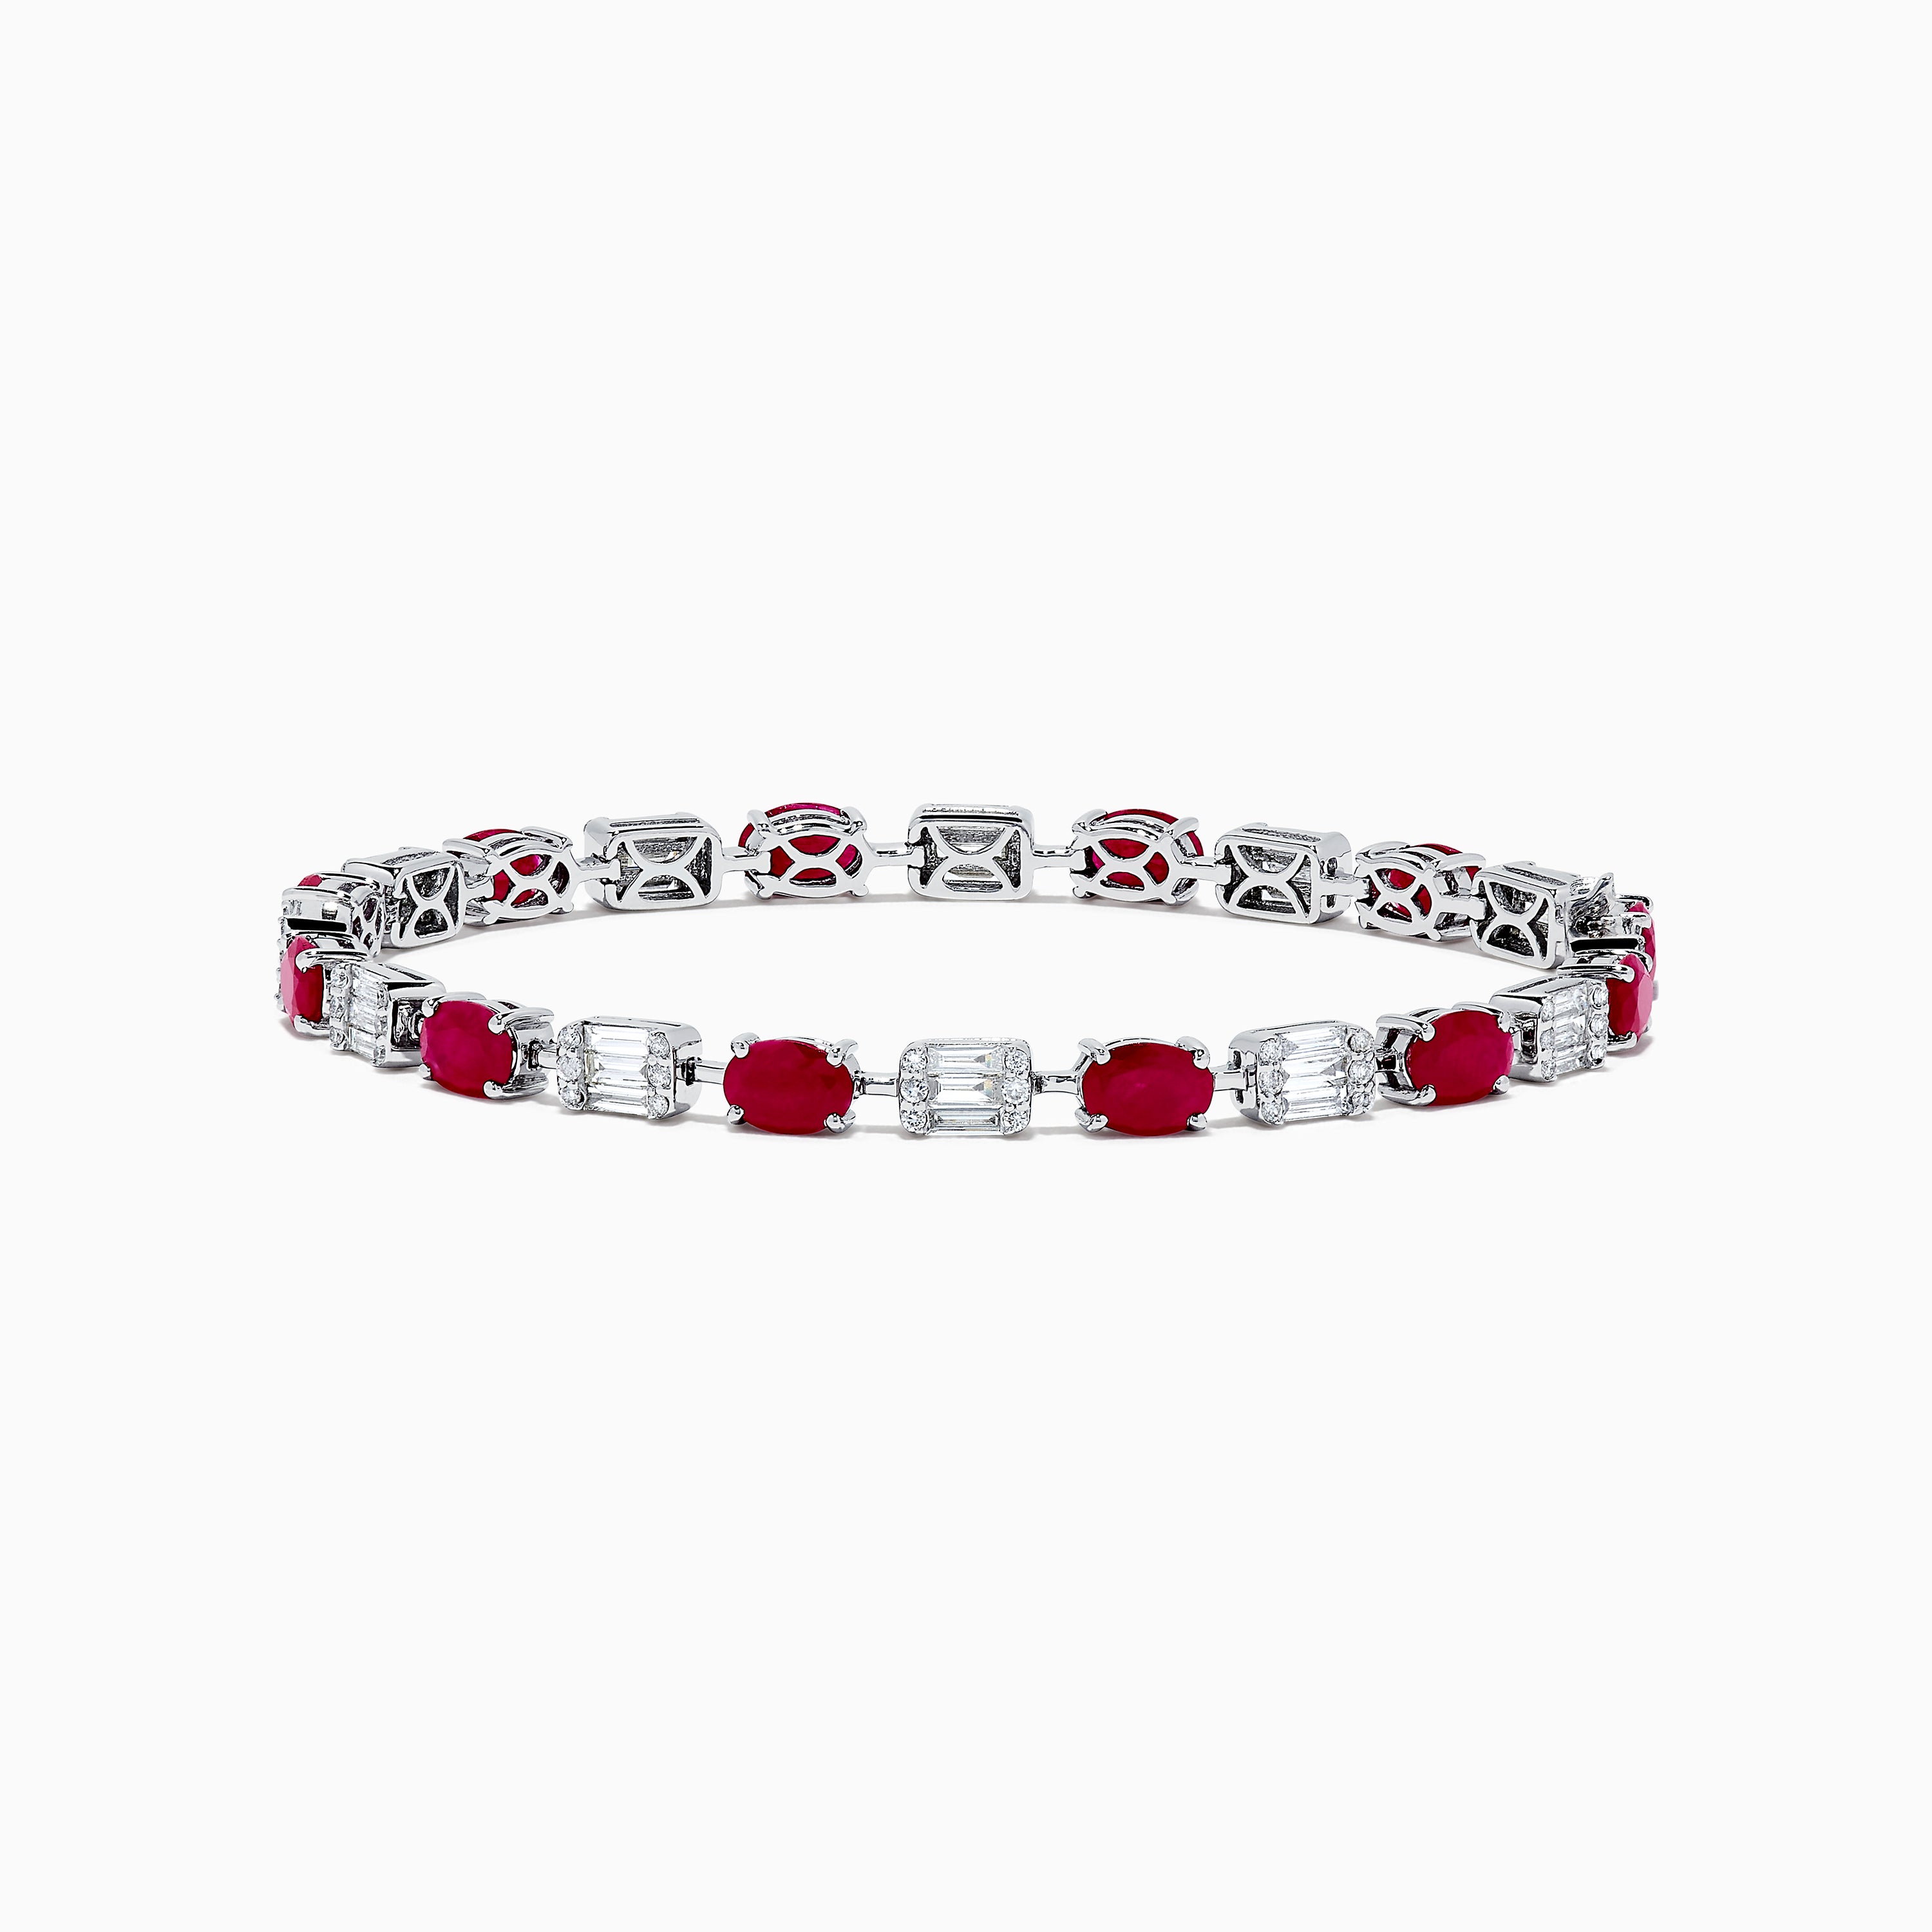 White Gold, Ruby And Diamond Bracelet Available For Immediate Sale At  Sotheby's